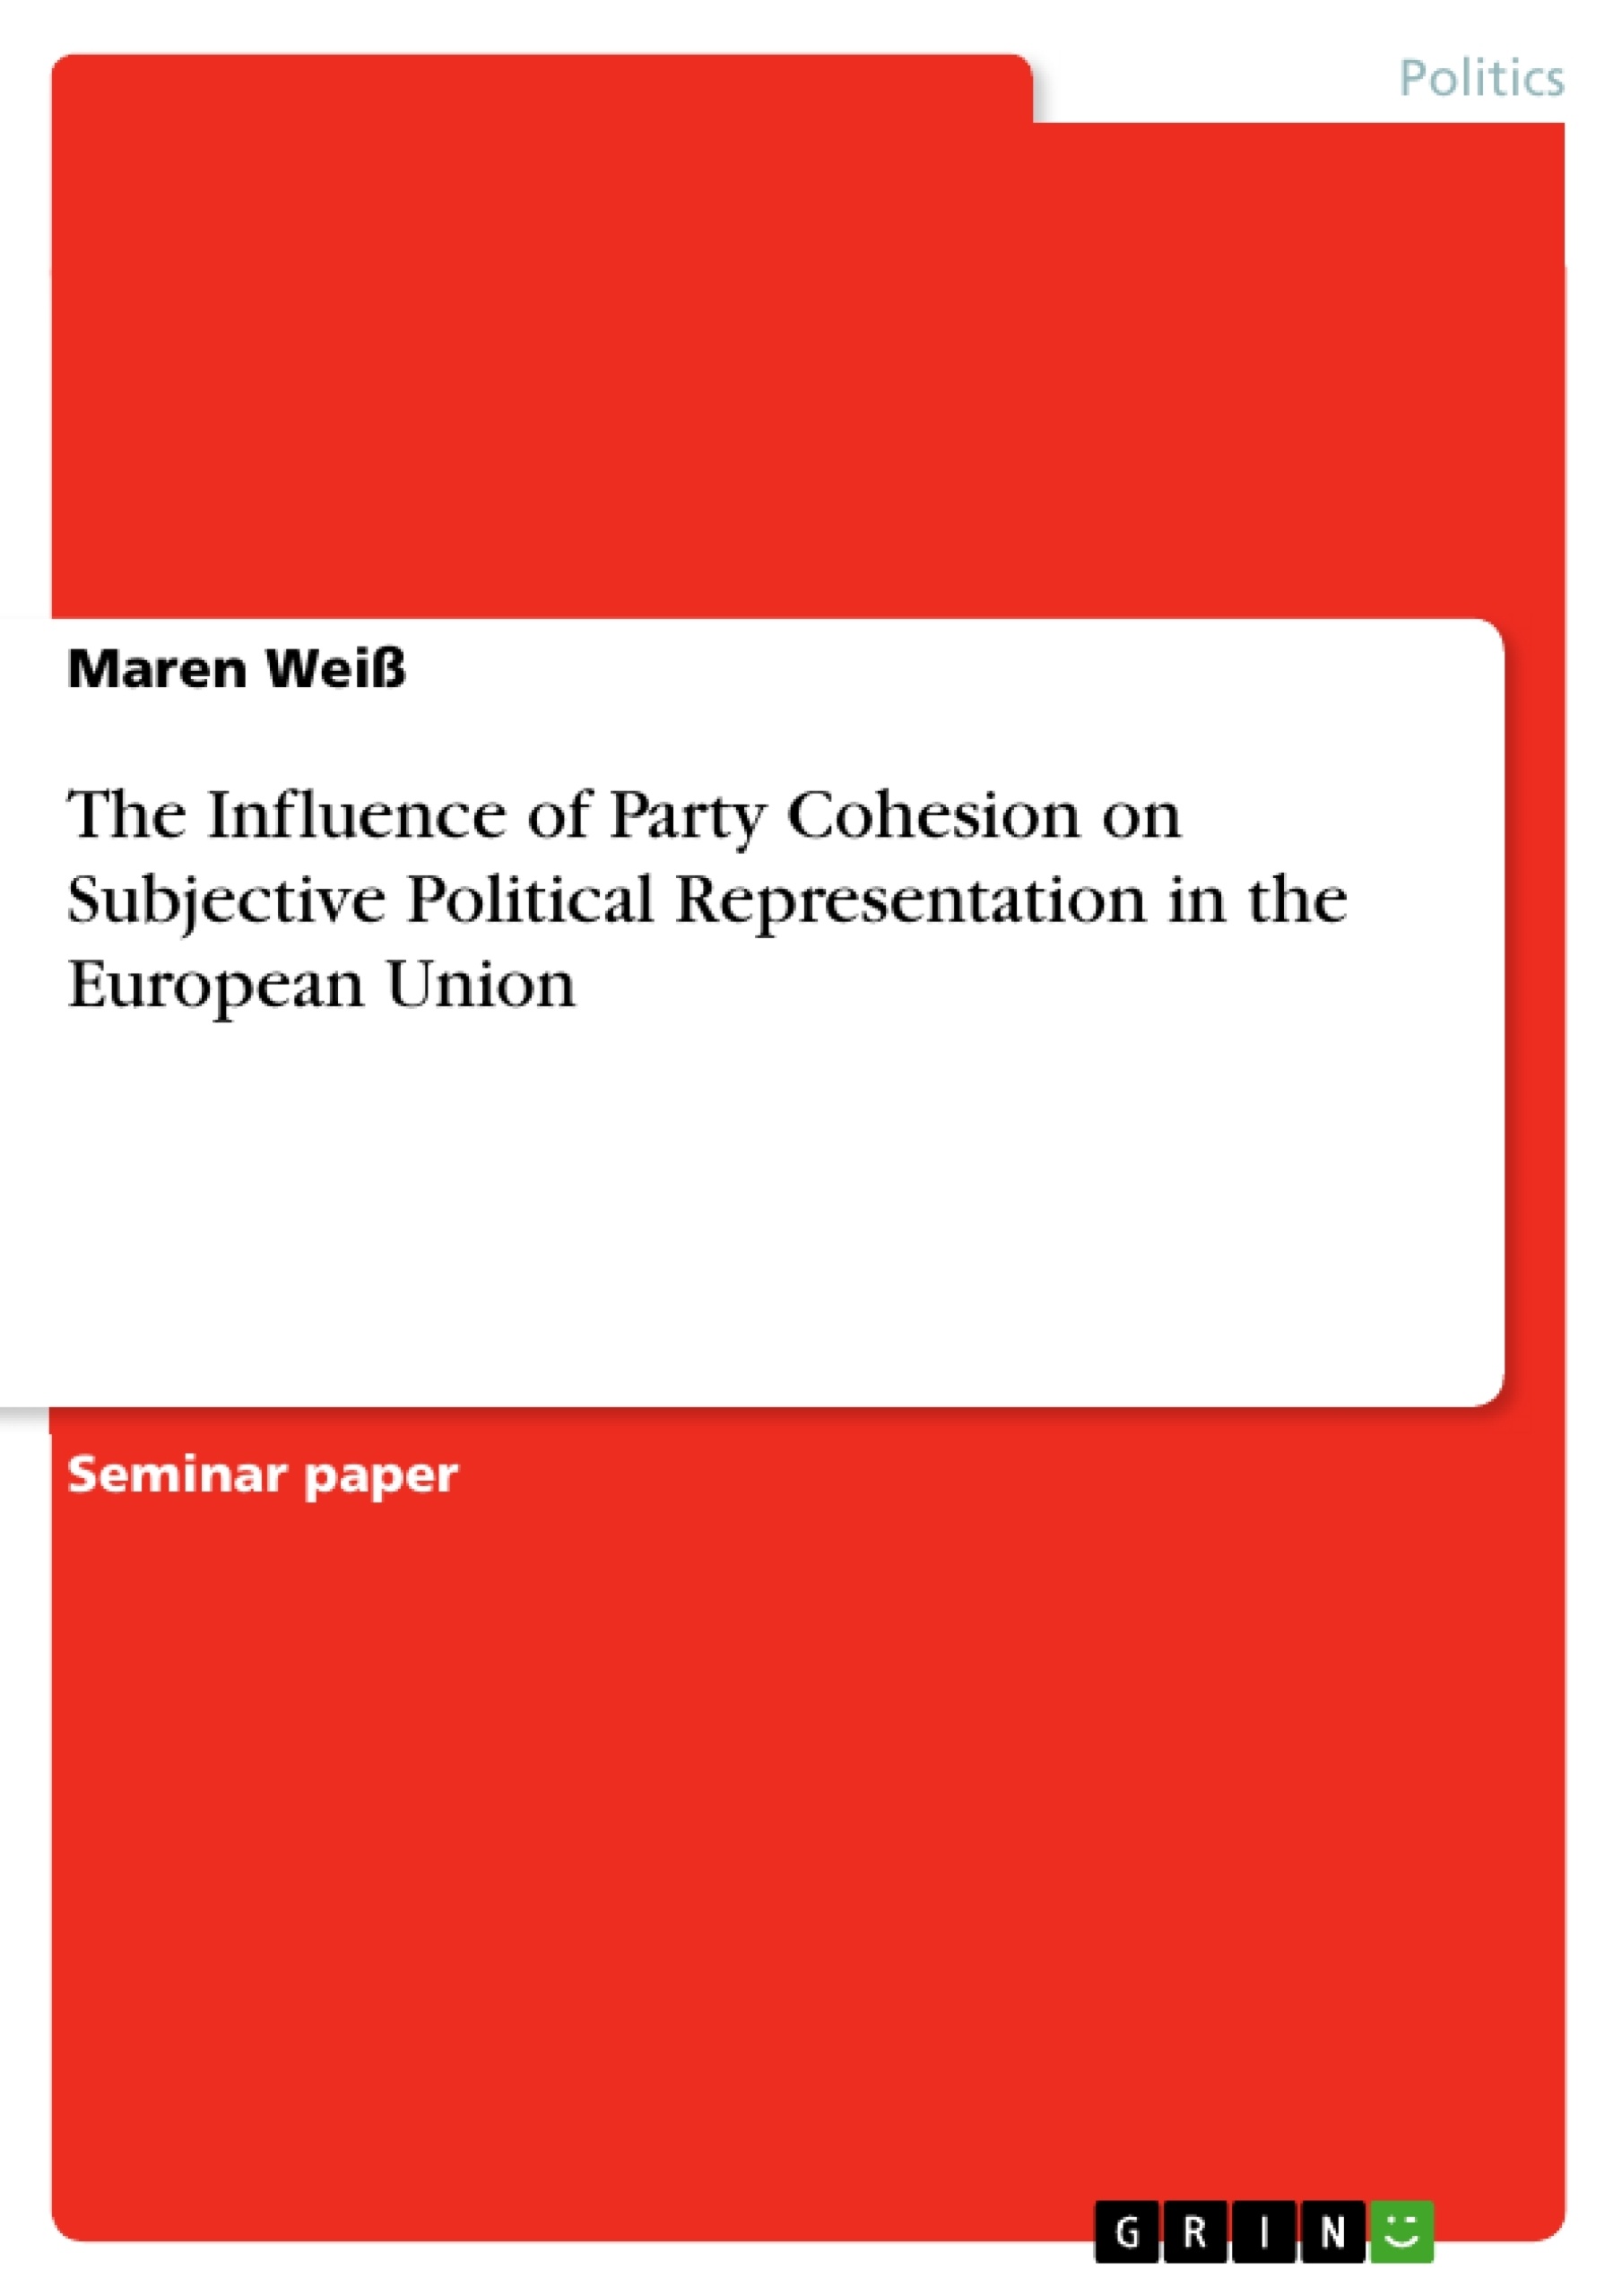 Titel: The Influence of Party Cohesion on Subjective Political Representation in the European Union